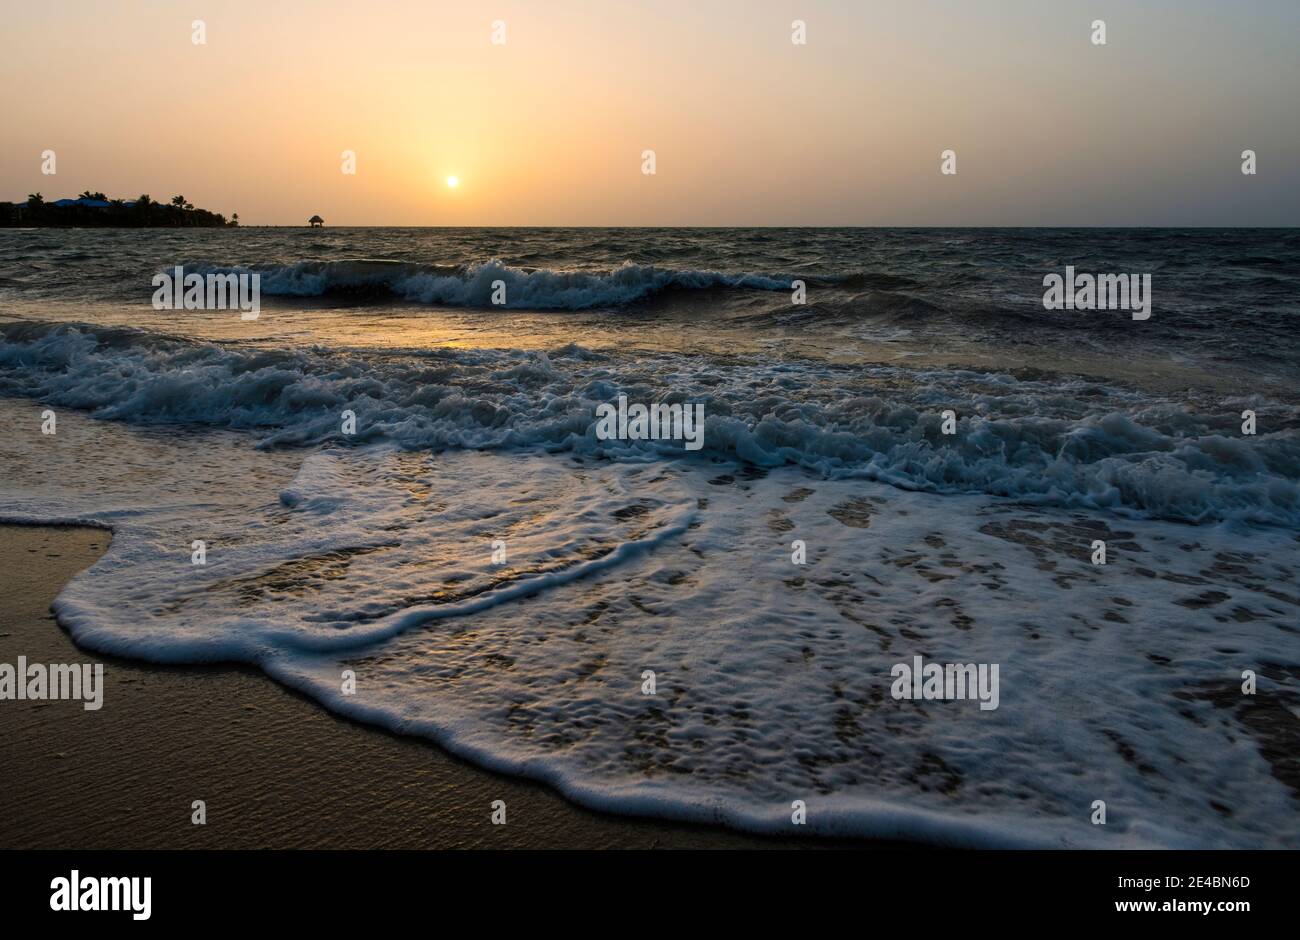 Waves on the beach at sunrise, Placencia, Stann Creek District, Belize Stock Photo